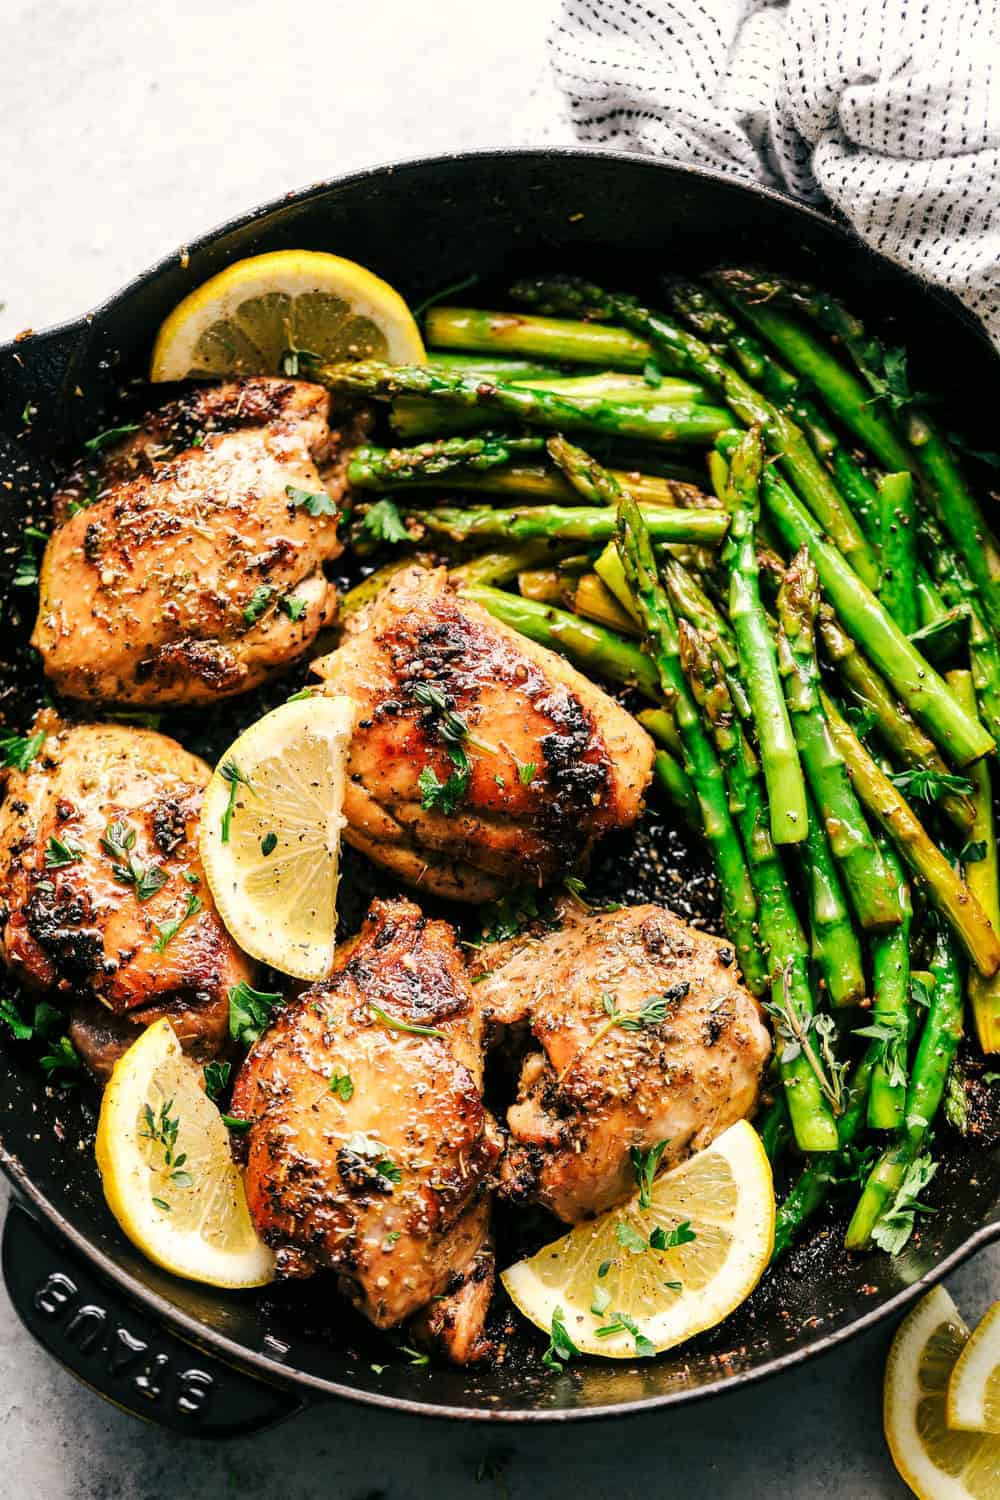 Chicken And Asparagus Recipe
 Lemon Garlic Butter Herb Chicken with Asparagus